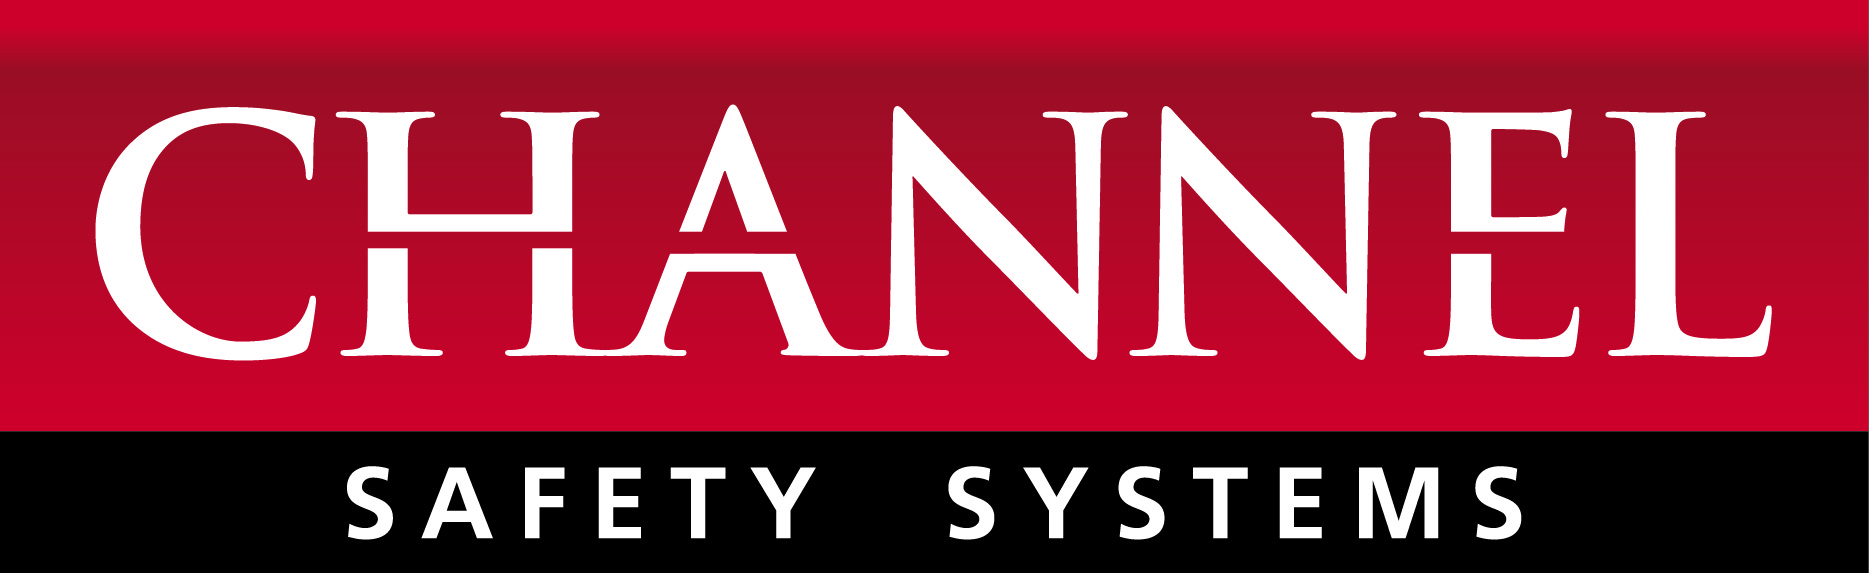 Channel Safety Systems Ltd